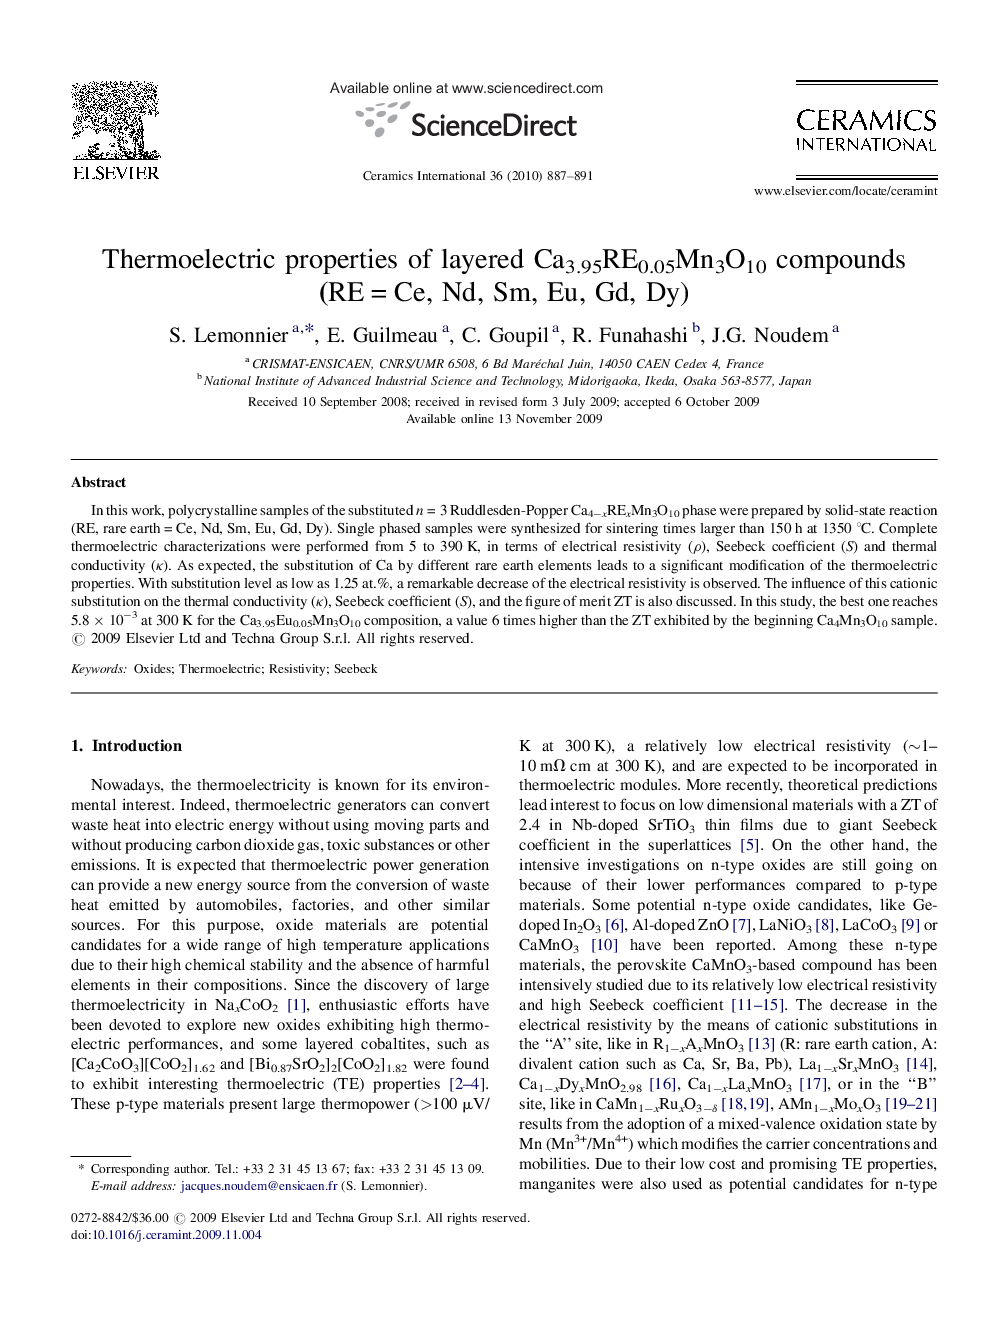 Thermoelectric properties of layered Ca3.95RE0.05Mn3O10 compounds (RE = Ce, Nd, Sm, Eu, Gd, Dy)